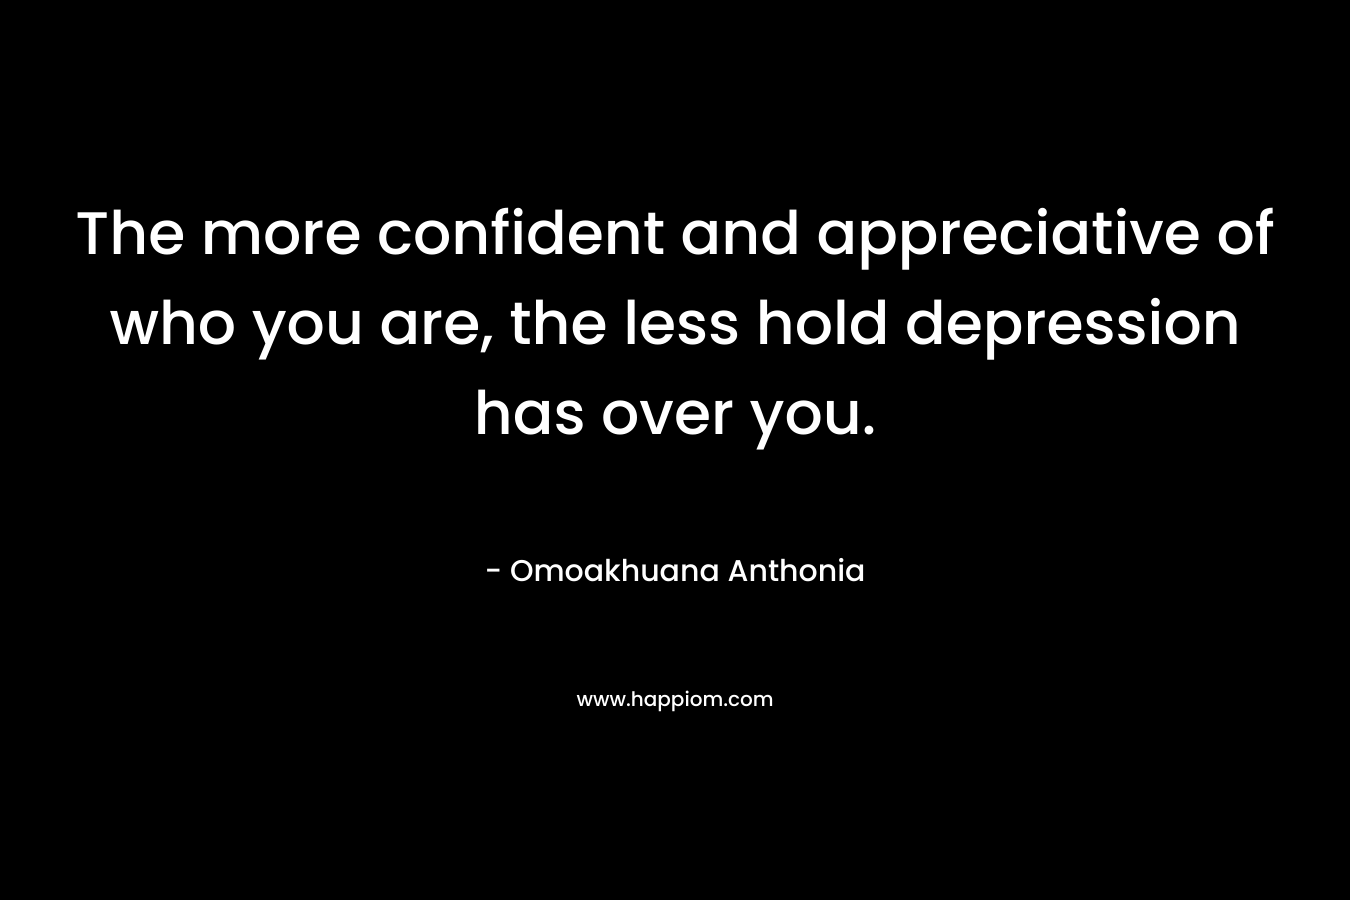 The more confident and appreciative of who you are, the less hold depression has over you. – Omoakhuana Anthonia